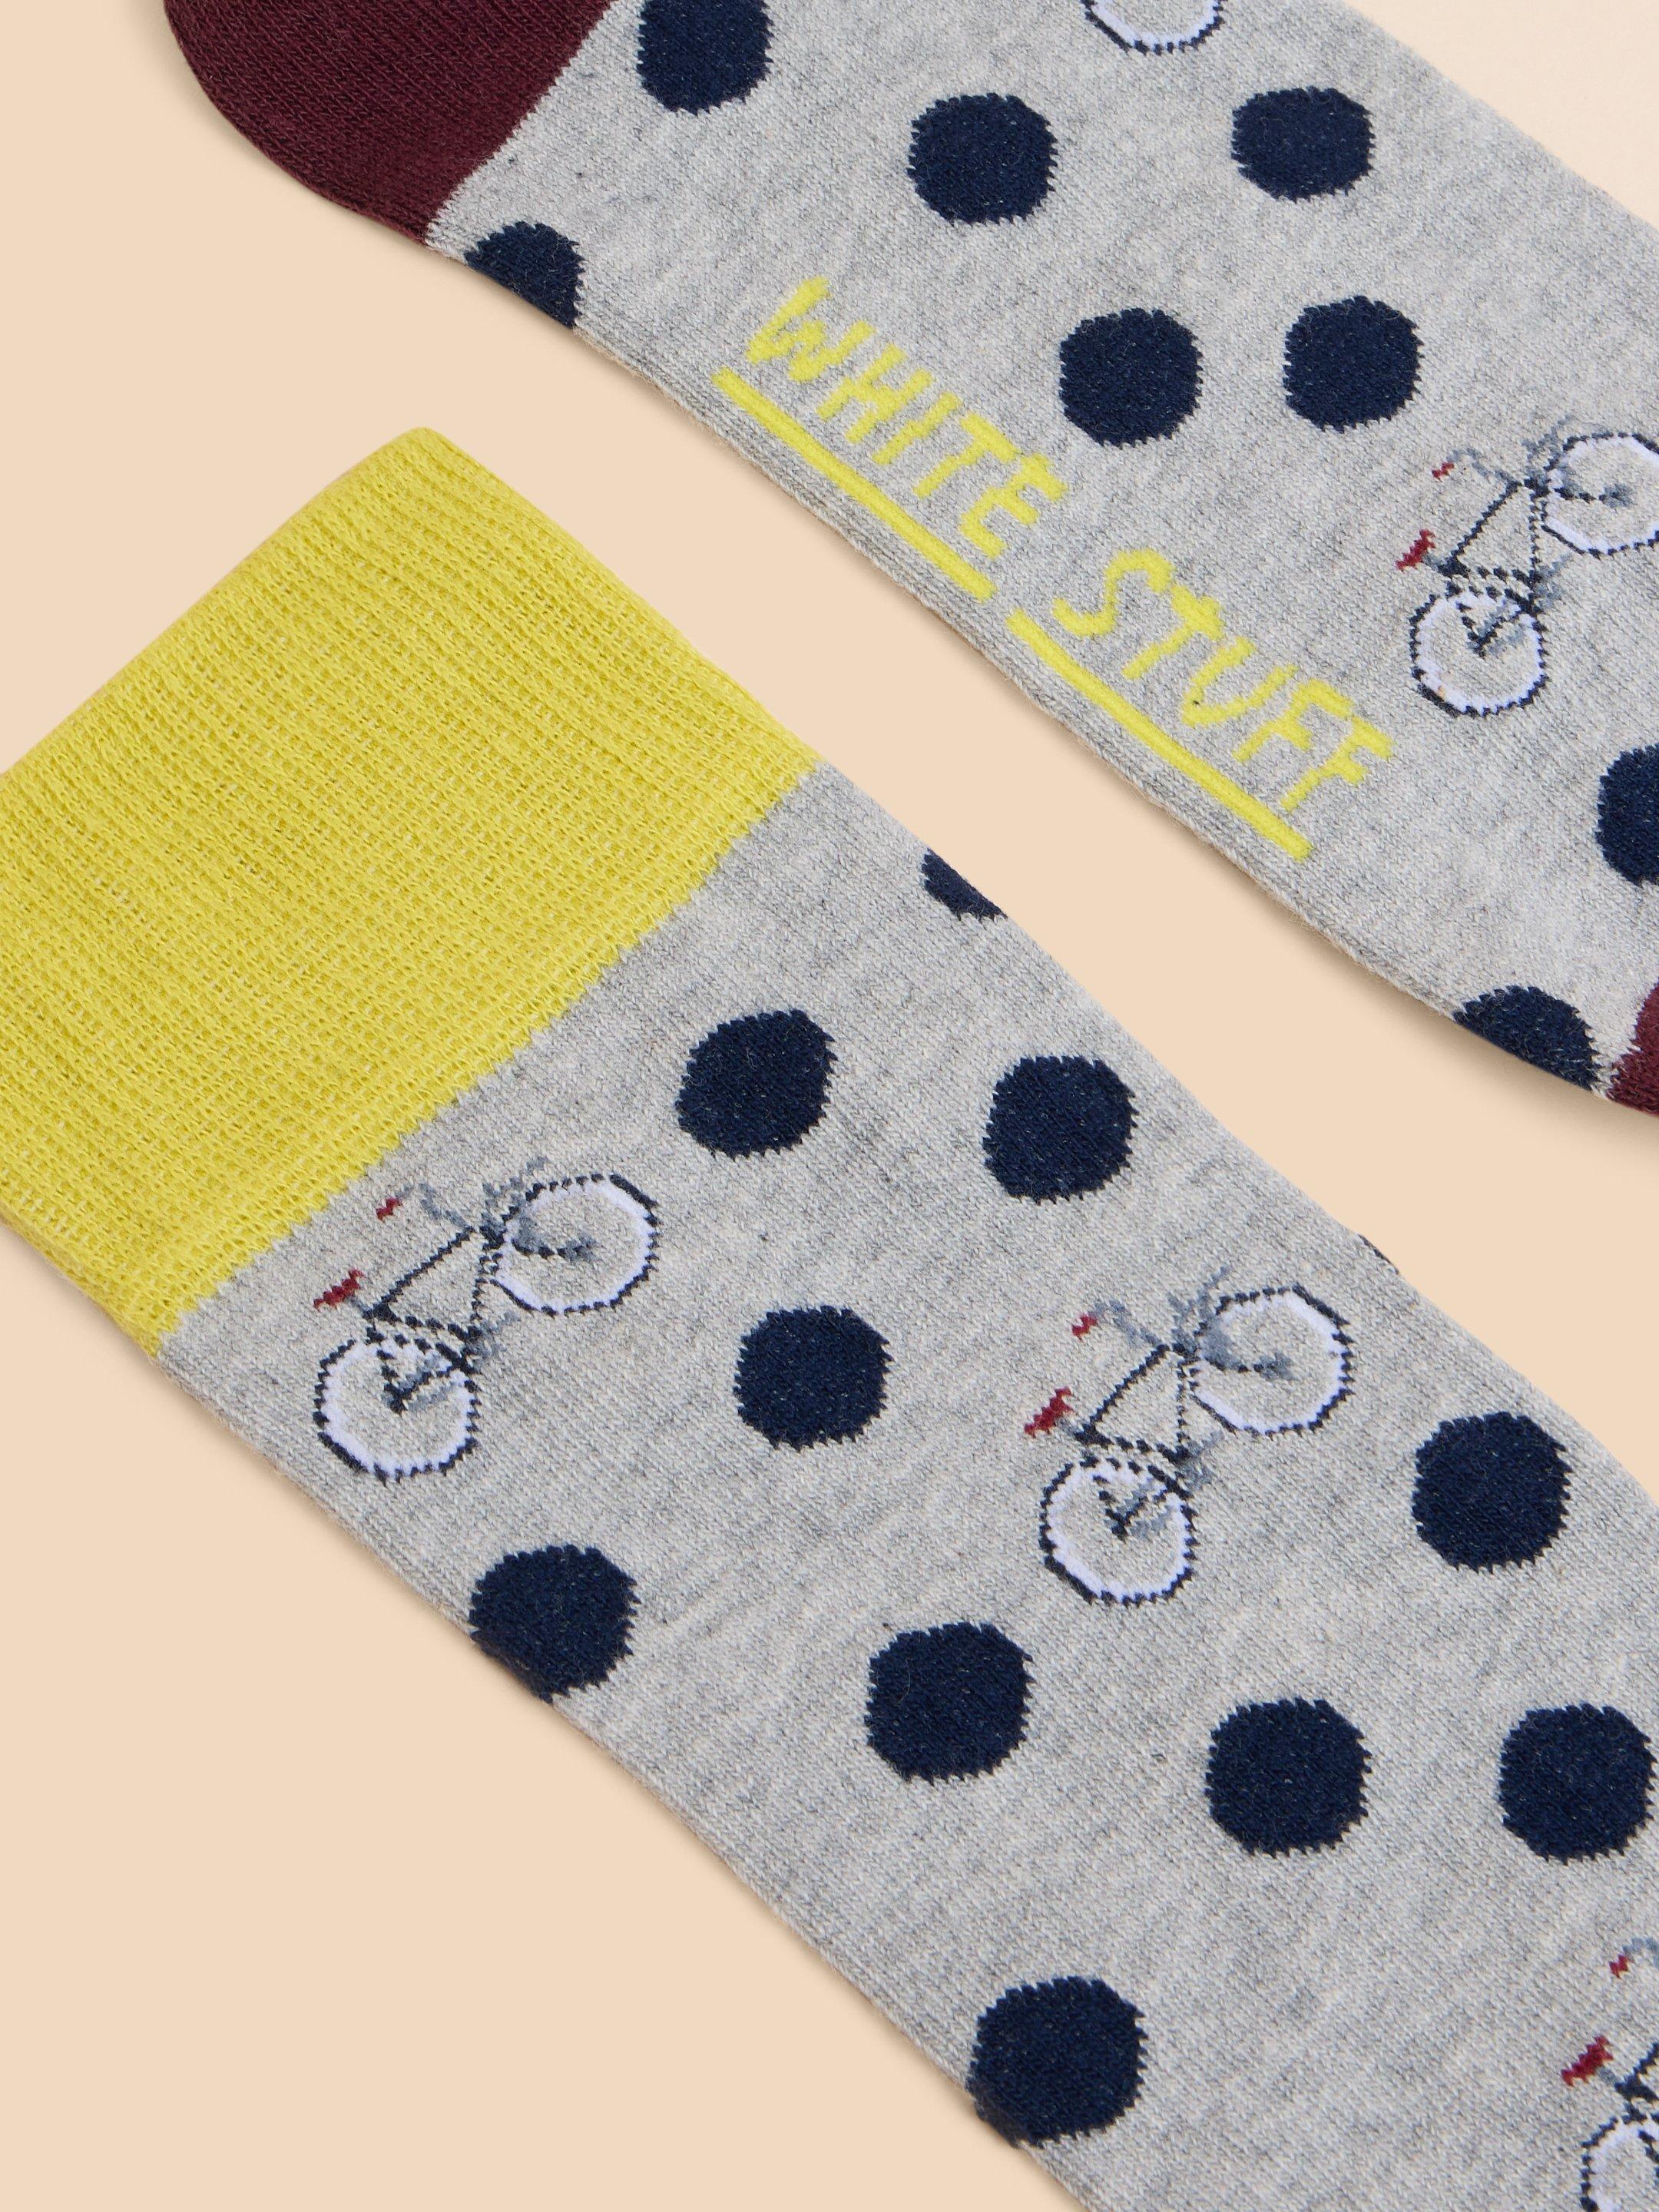 Spot Bicycle Ankle Sock